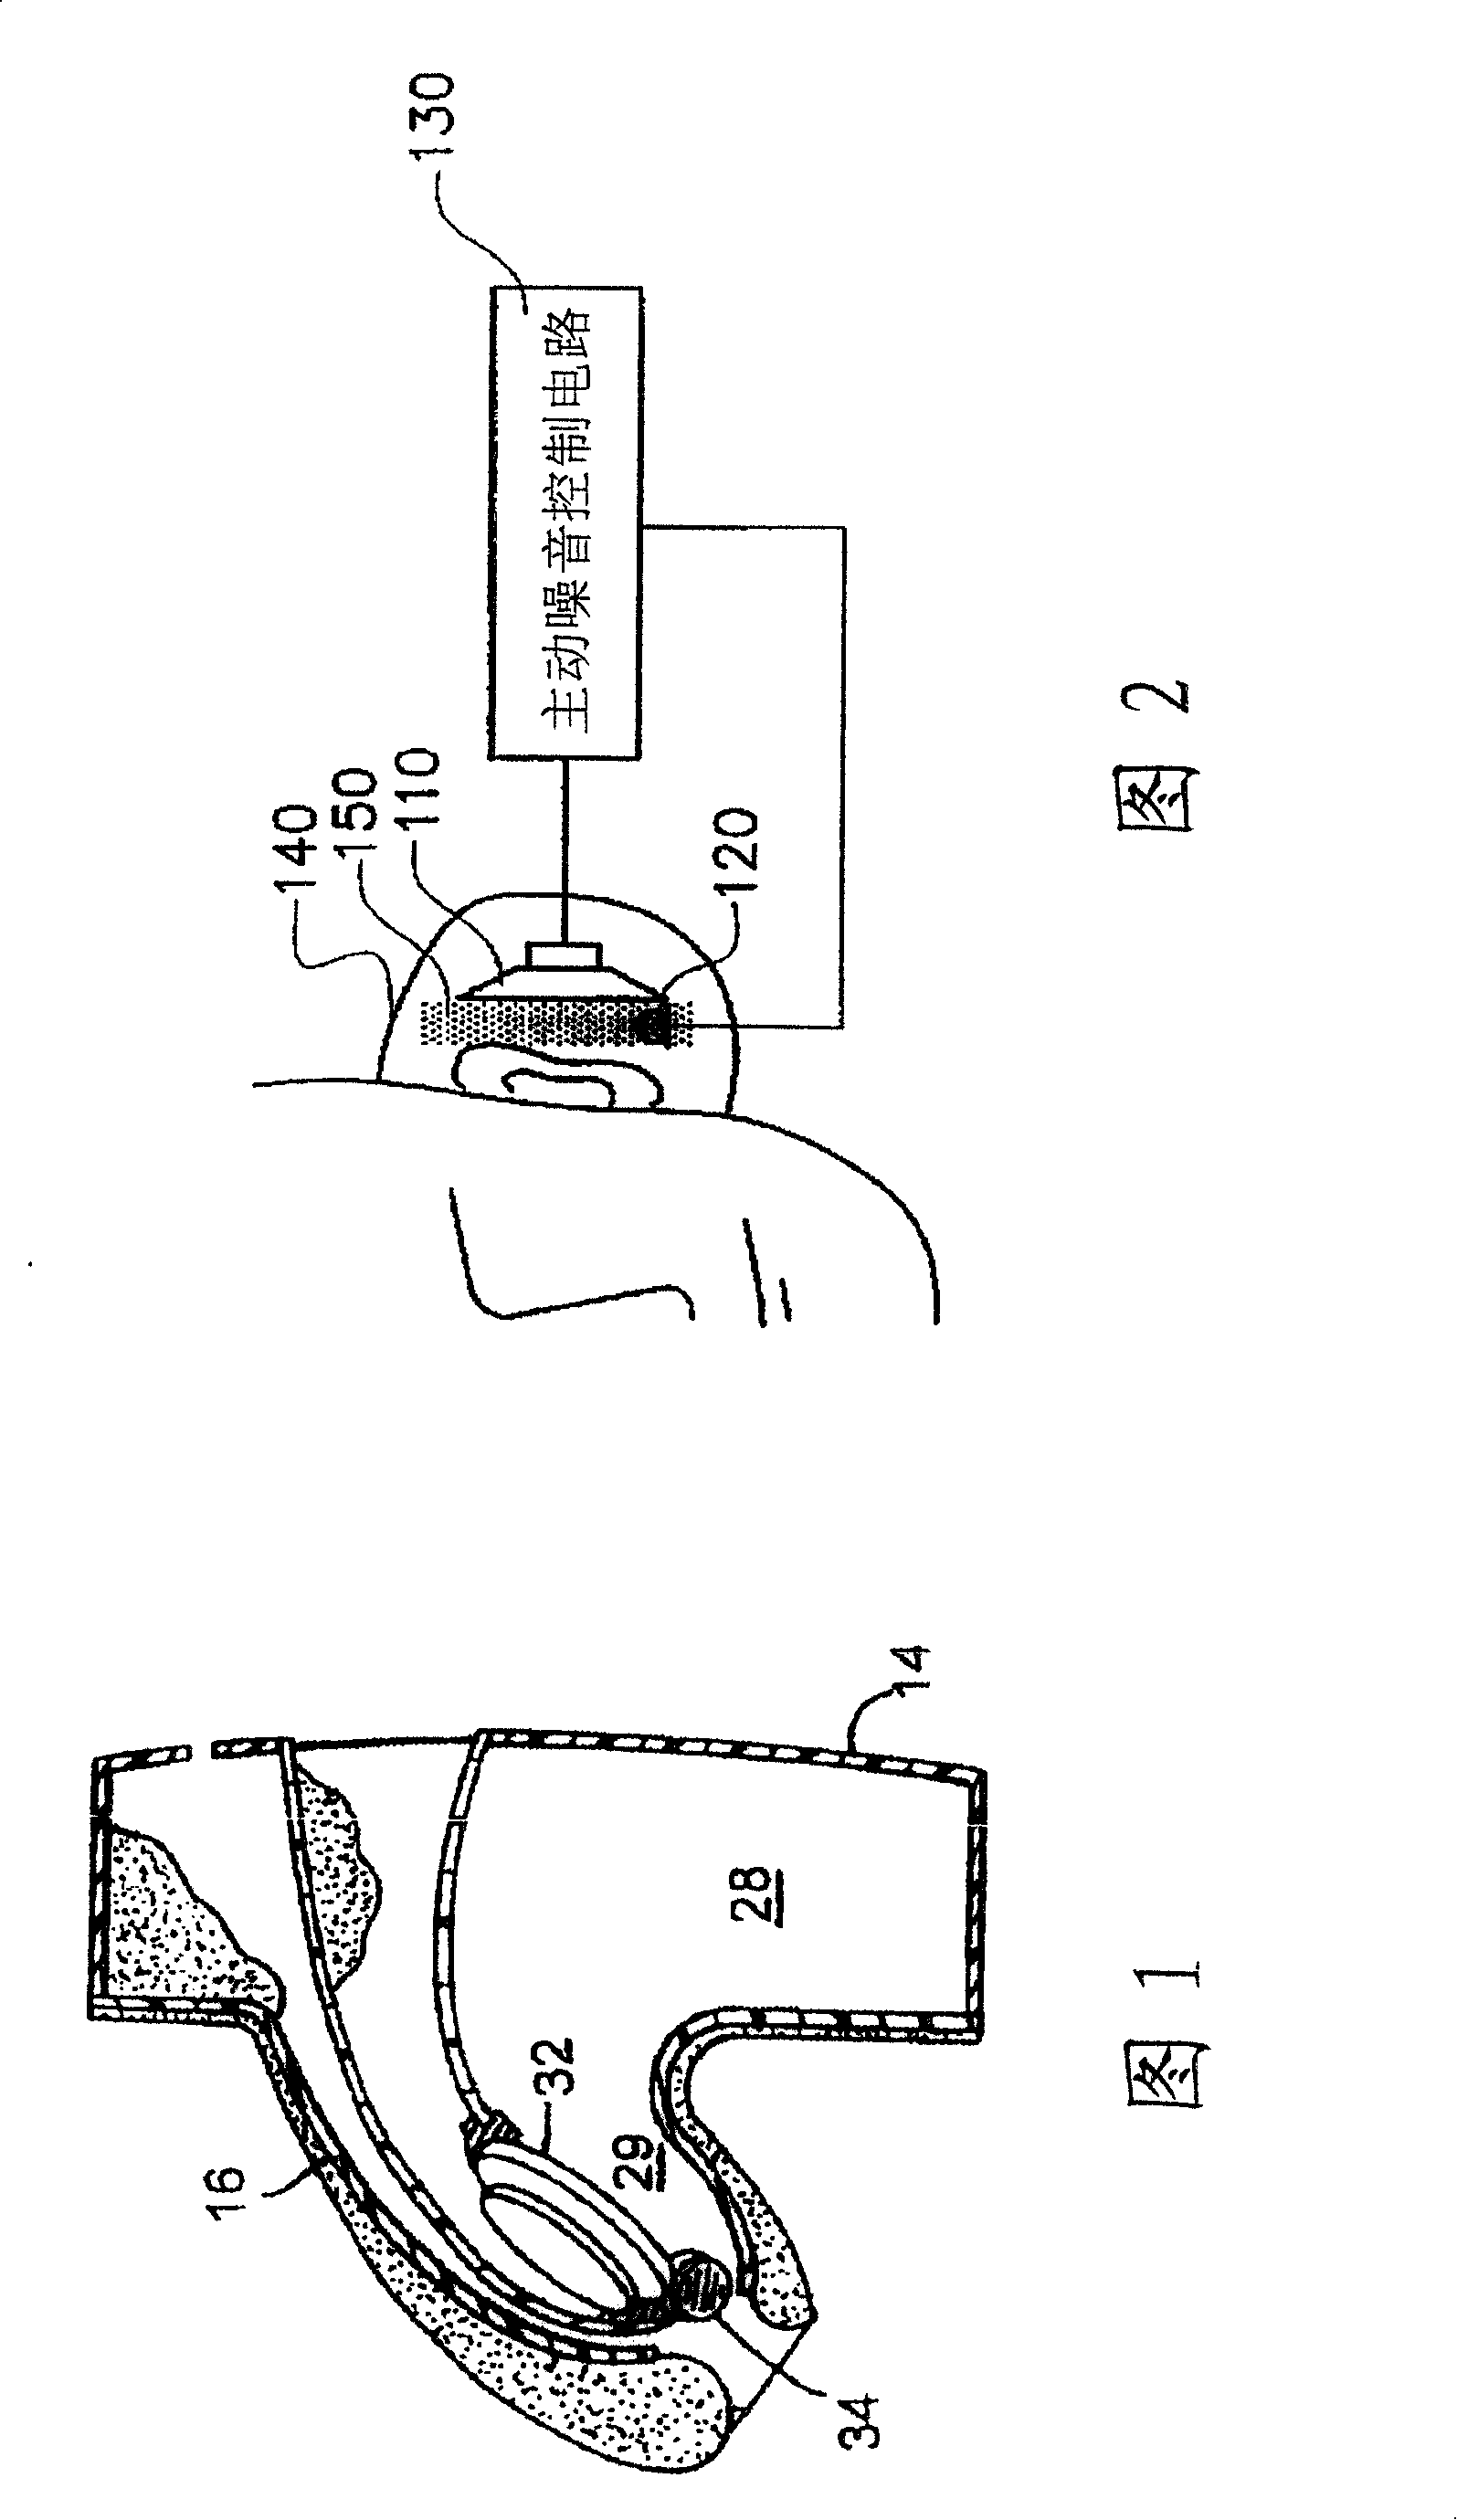 A noise suppression device and method